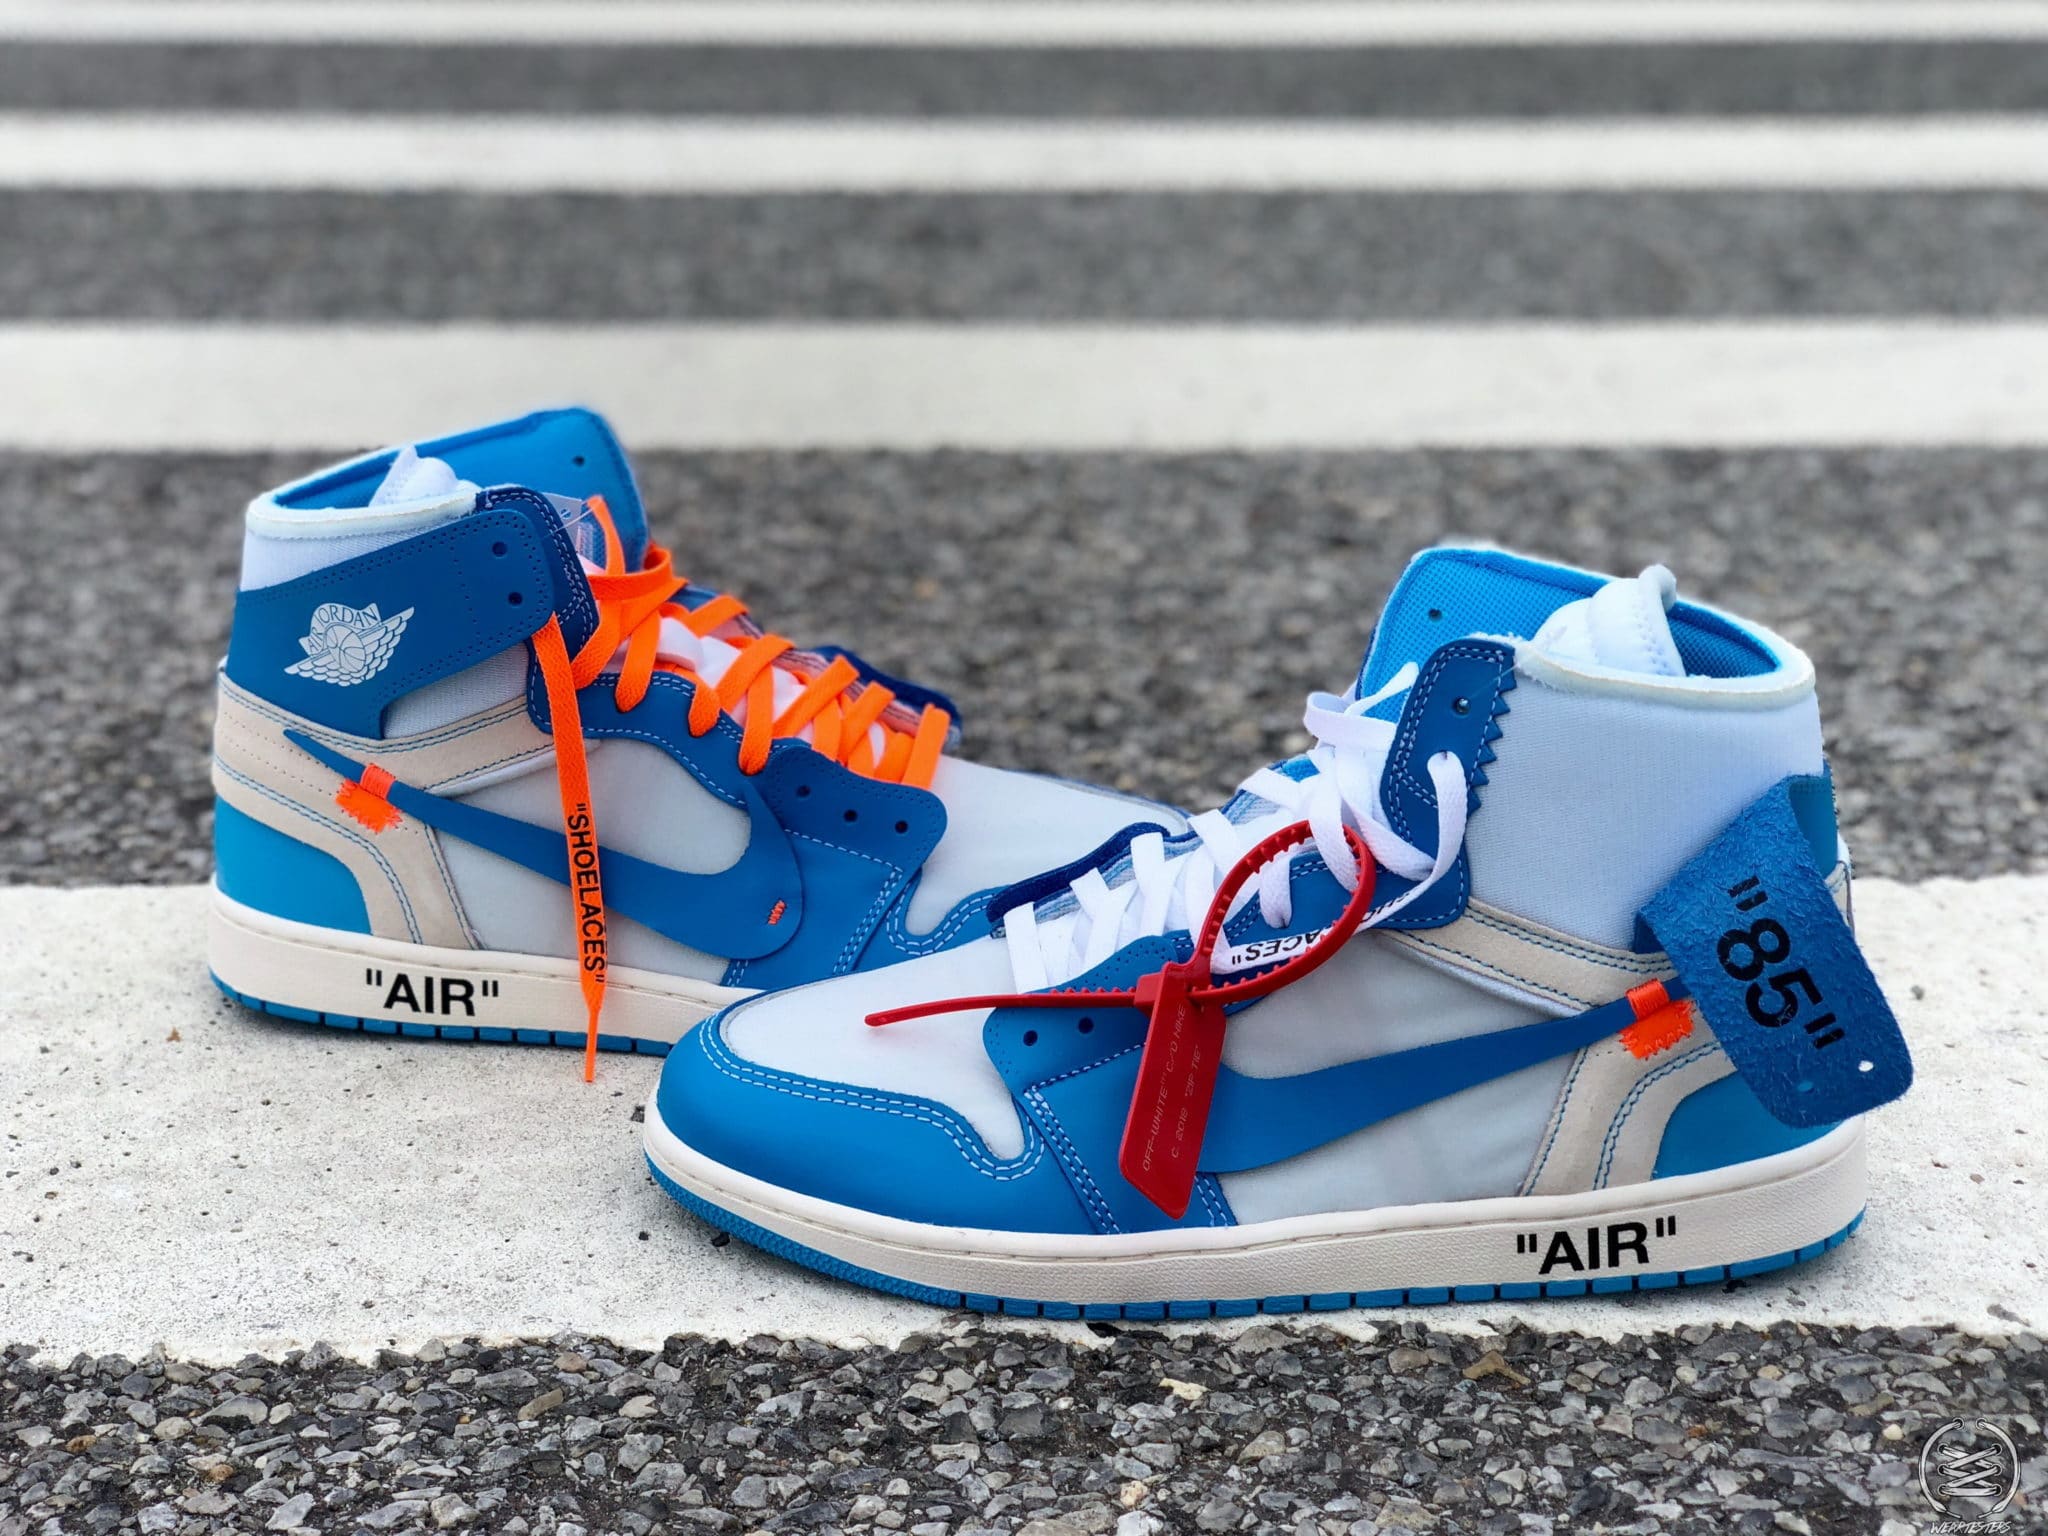 Endurance from now on Mutton Here's a Detailed Look at Virgil Abloh's Off-White Air Jordan 1 'UNC' -  WearTesters